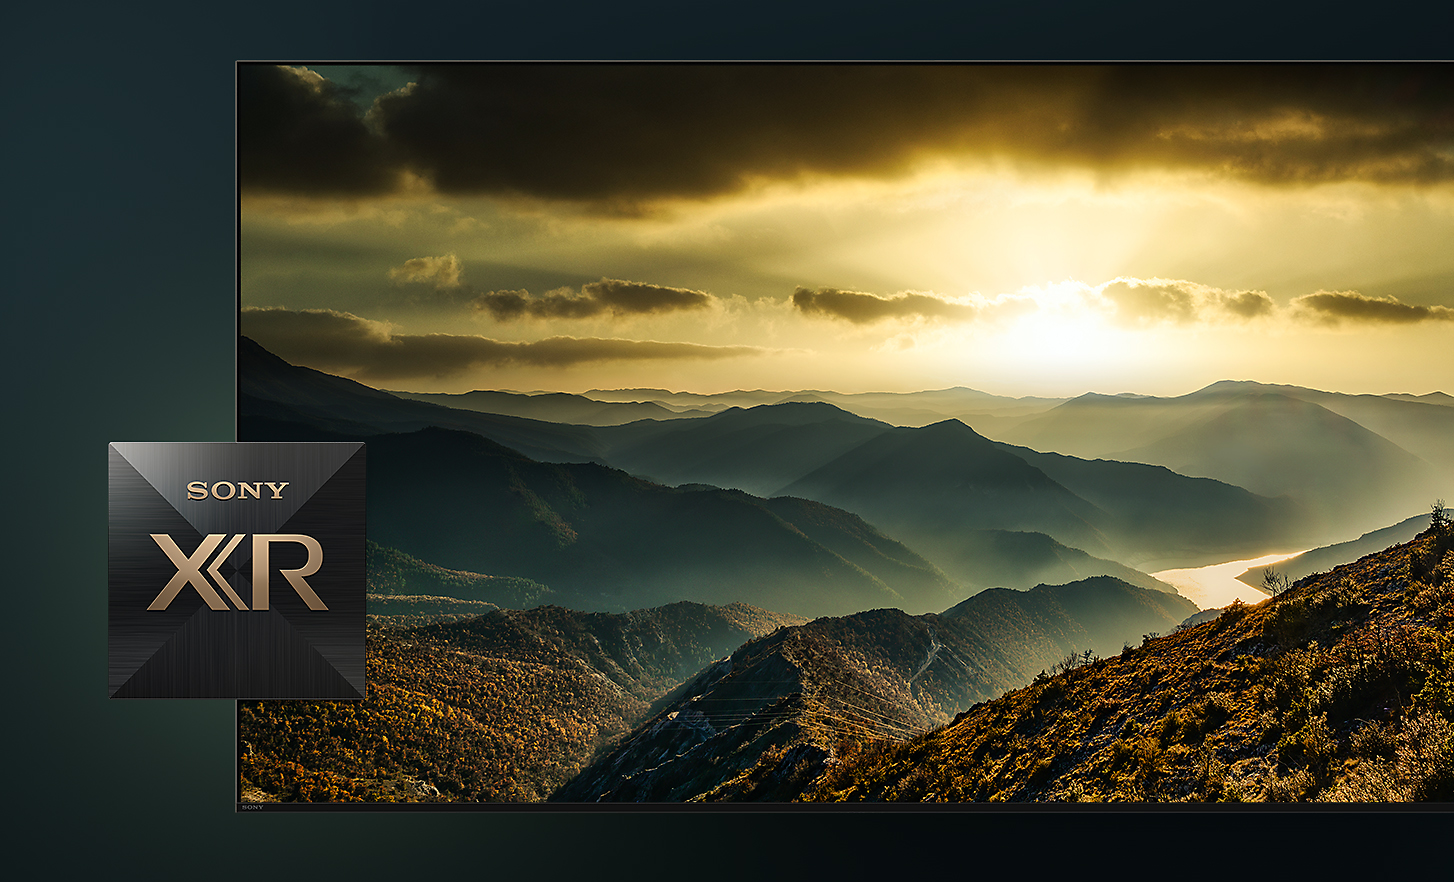 Detail of TV screen showing mountains and a sunset with Sony XR logo in foreground